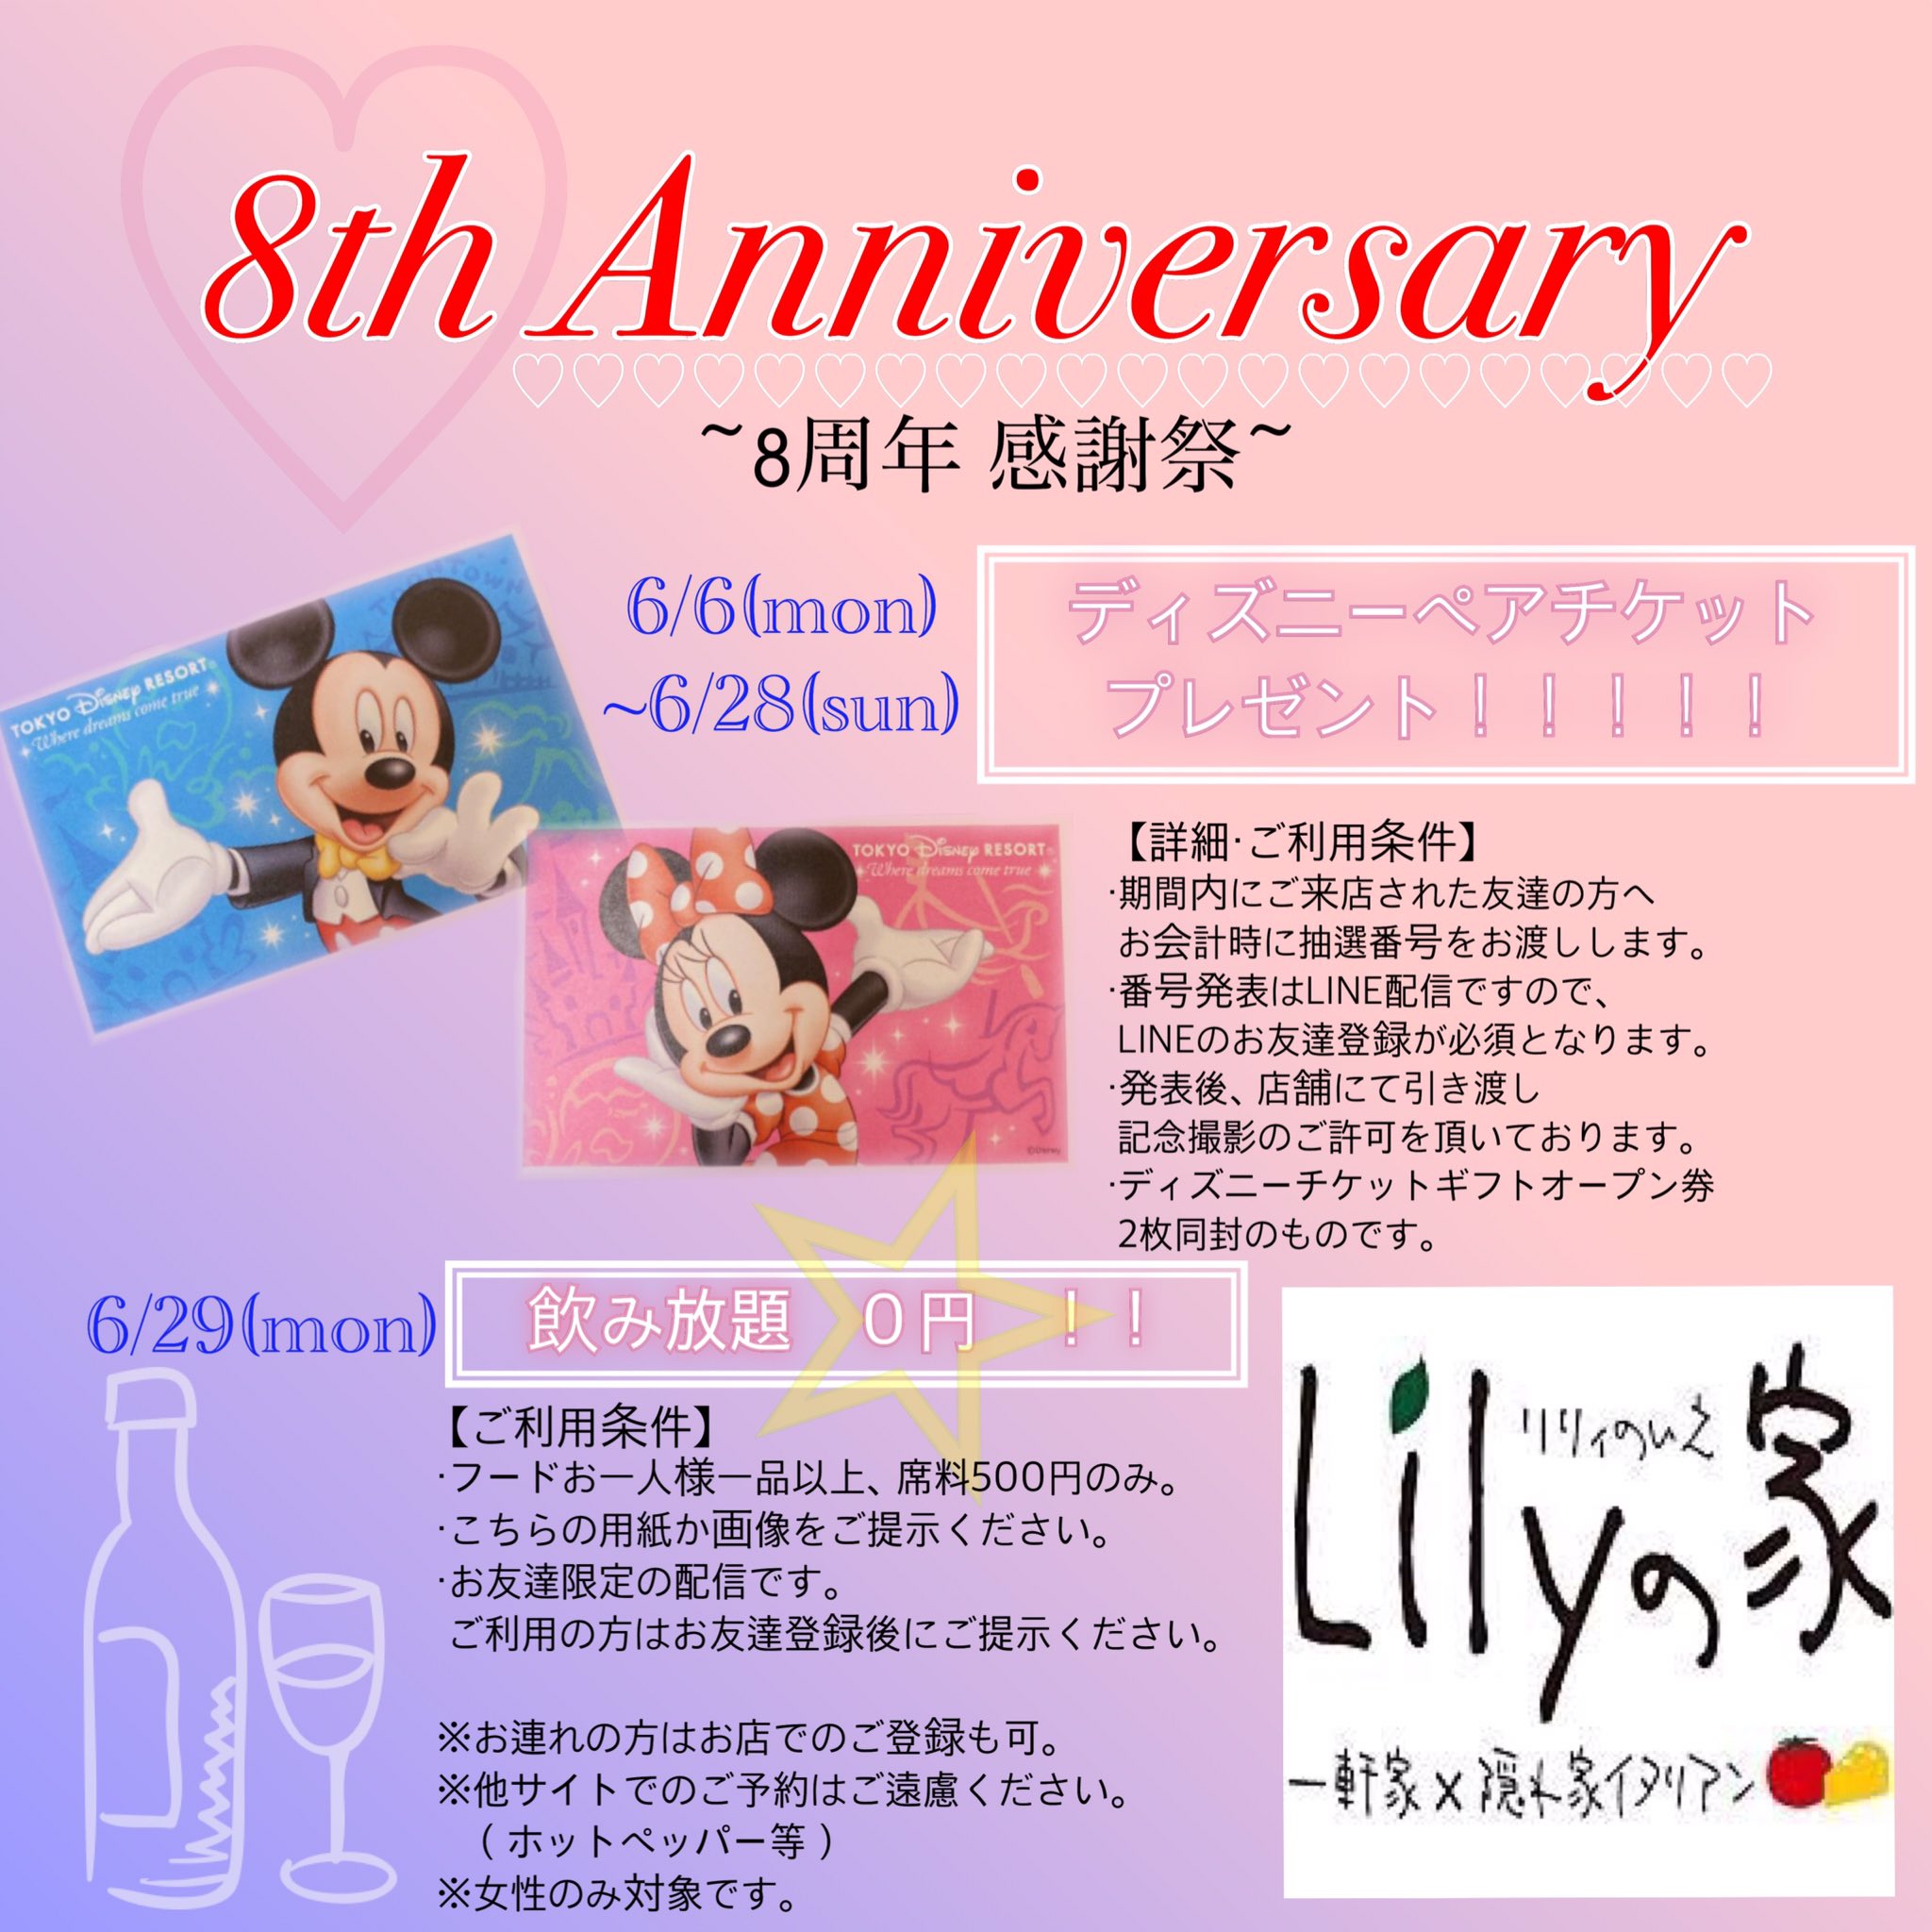 Lilyの家 リリィの家 Lily Chan Twitter